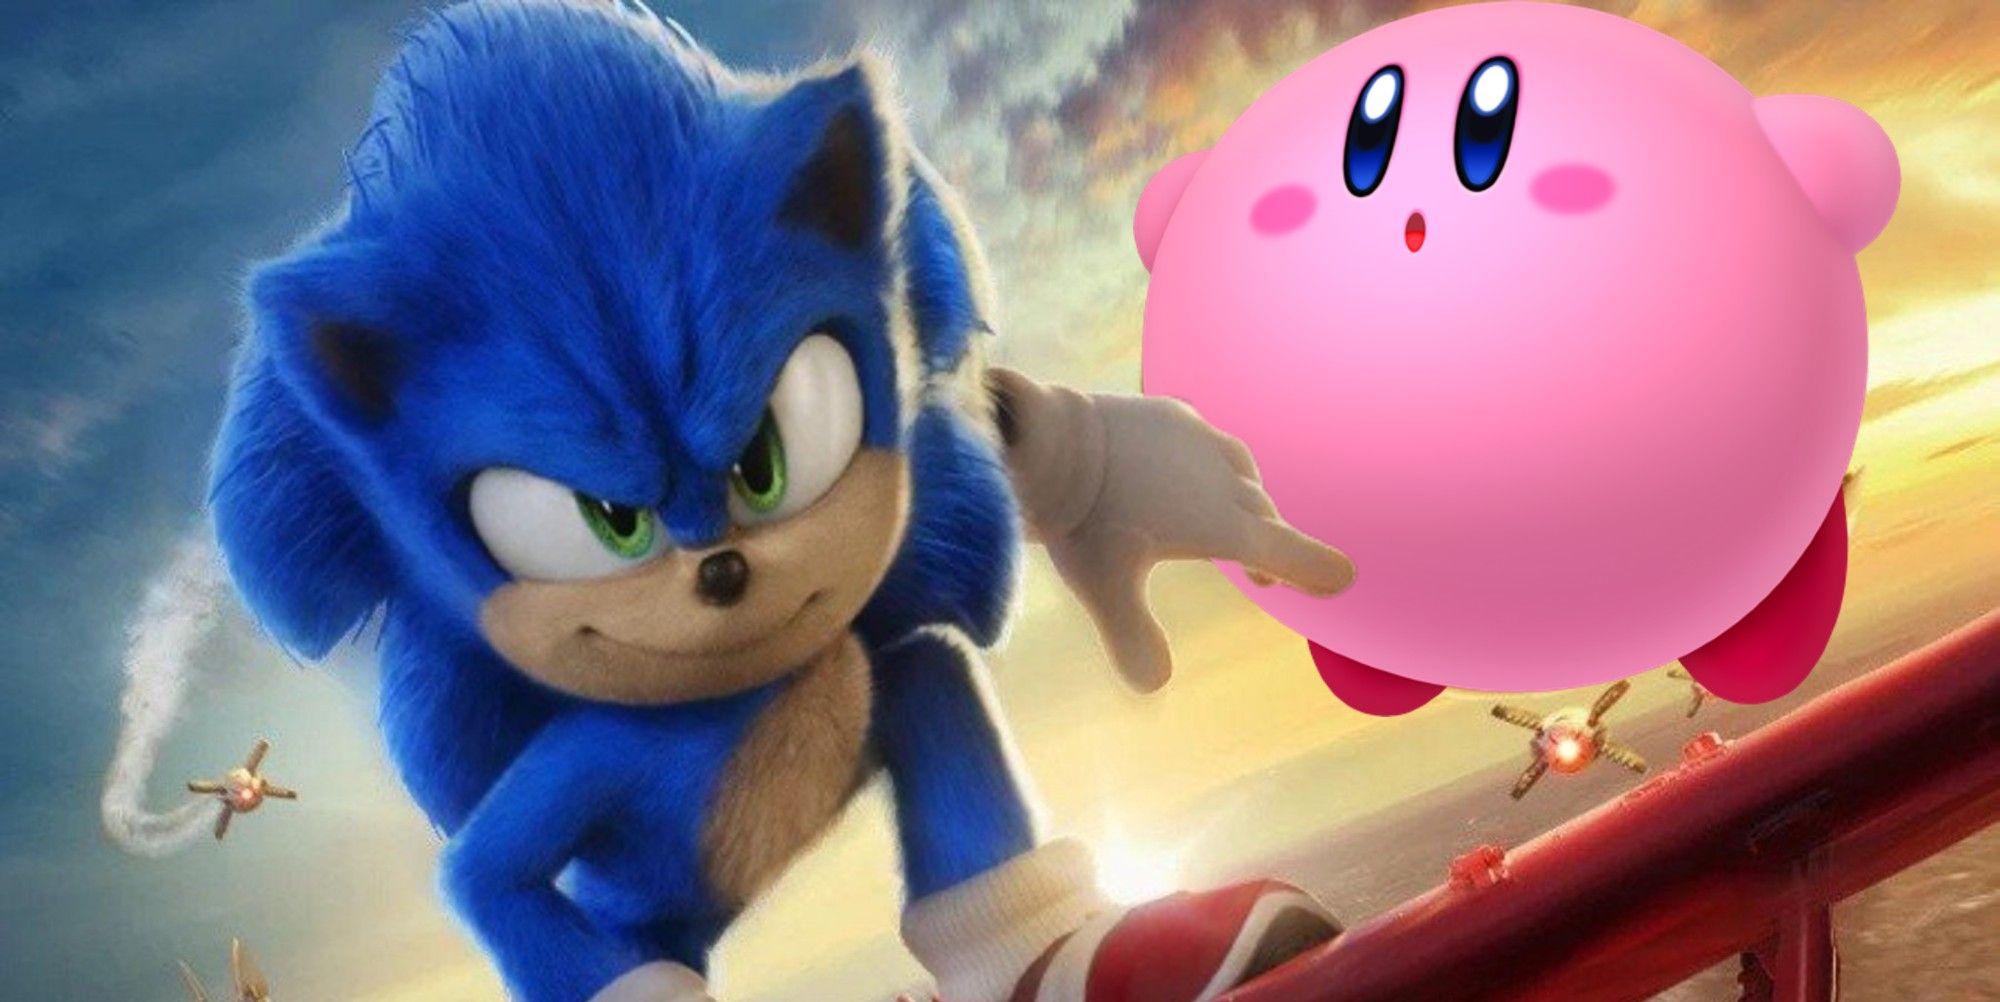 sonic and kirby